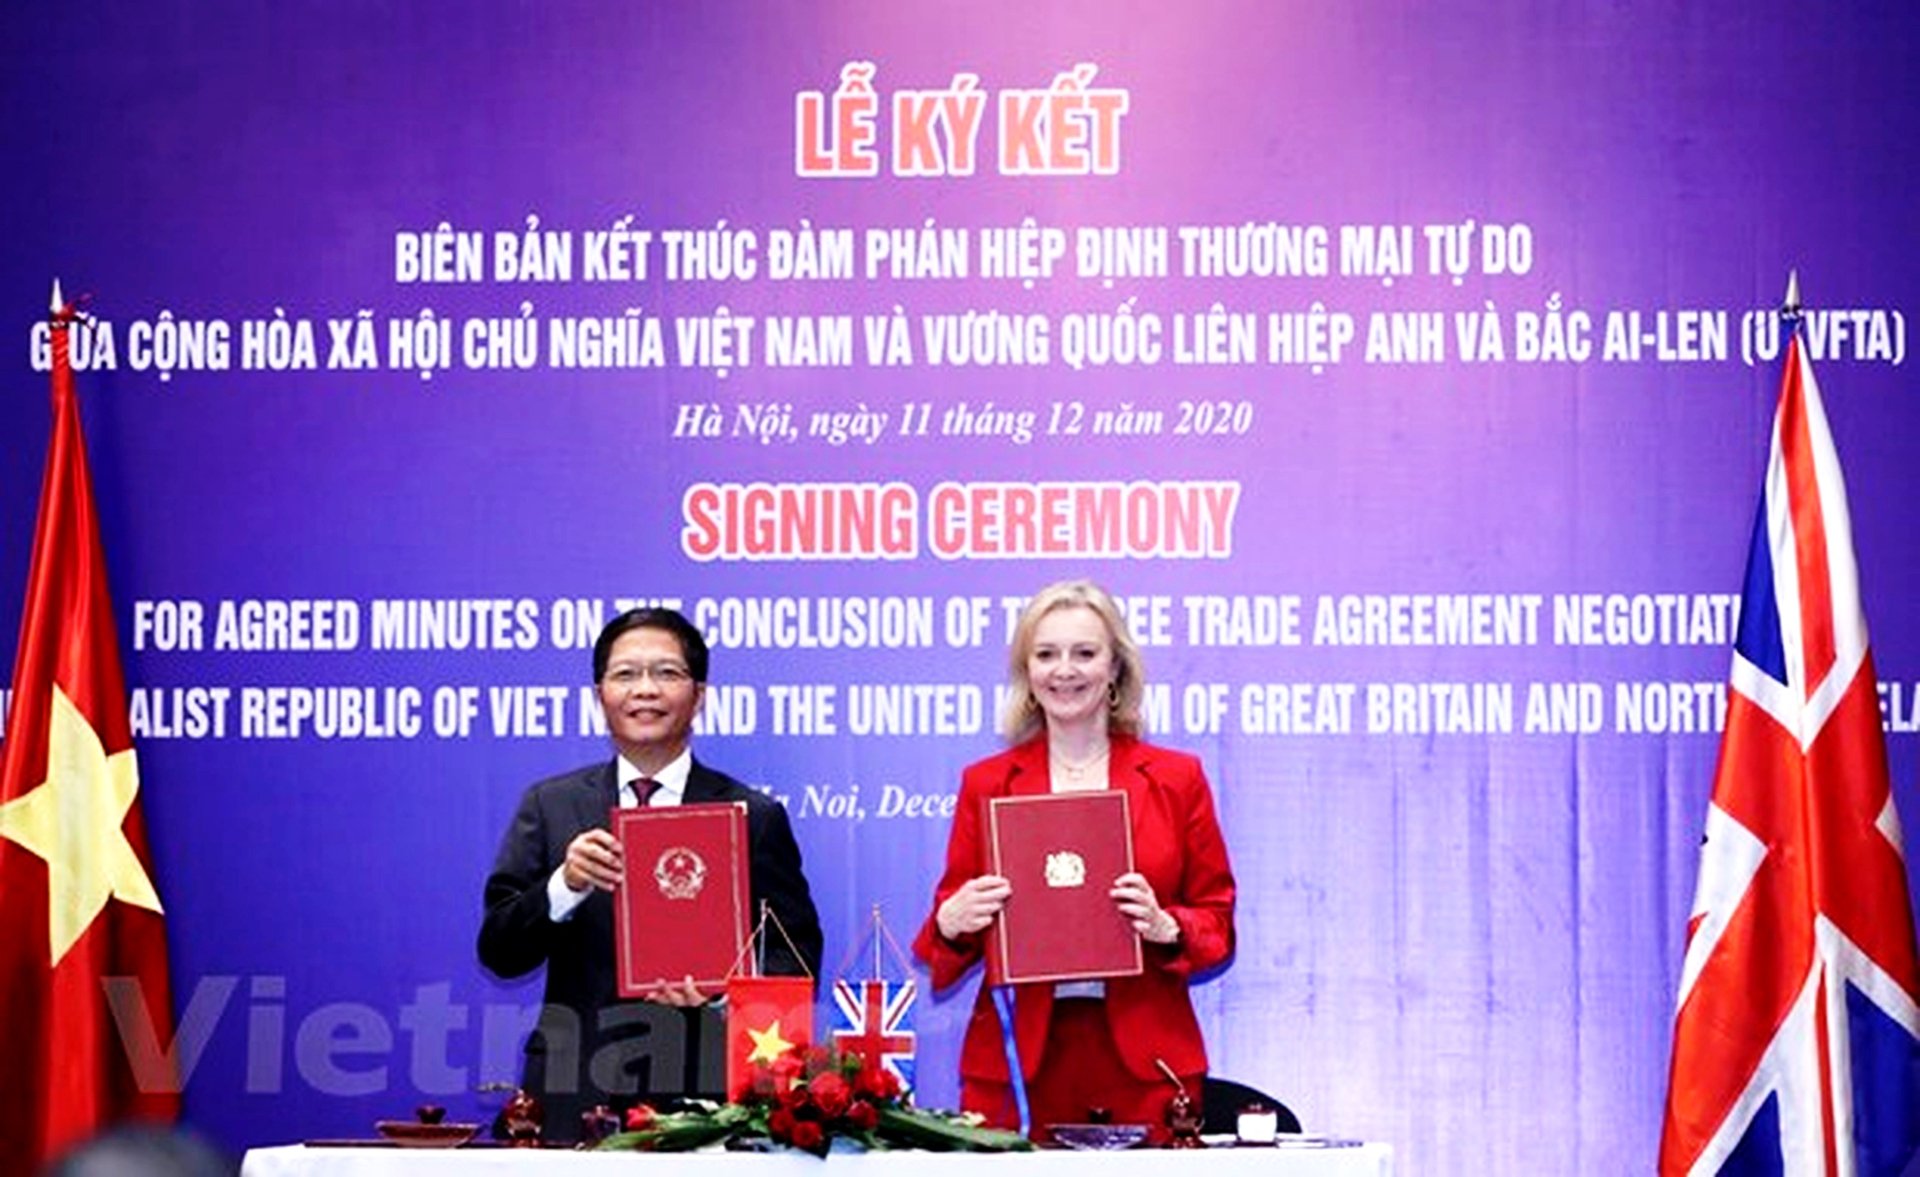 Vietnam's Minister of Industry and Trade Tran Tuan Anh (left) and the UK's International Trade Secretary Liz Truss in Hanoi